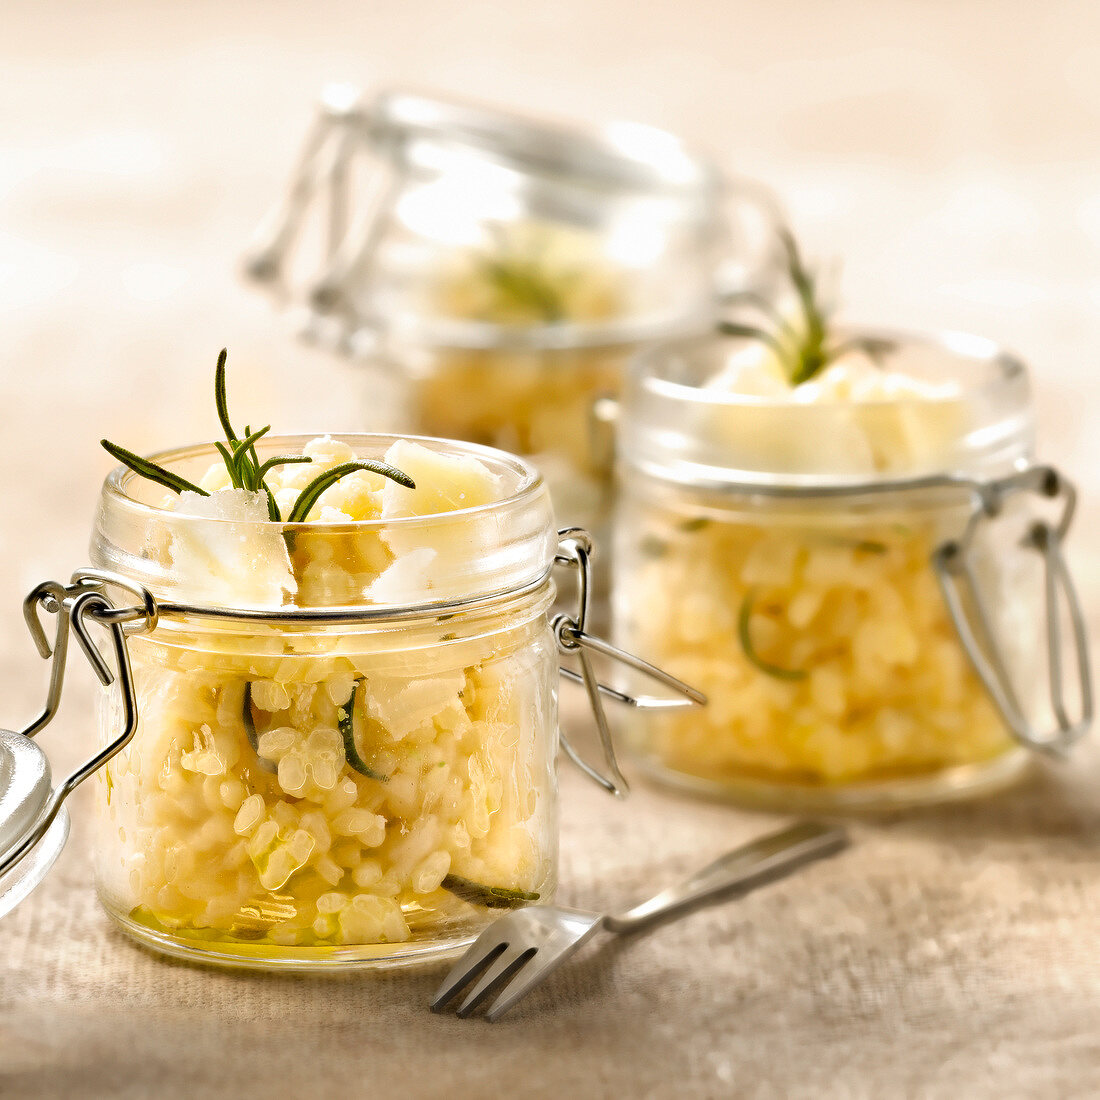 Risotto with parmesan and rosemary